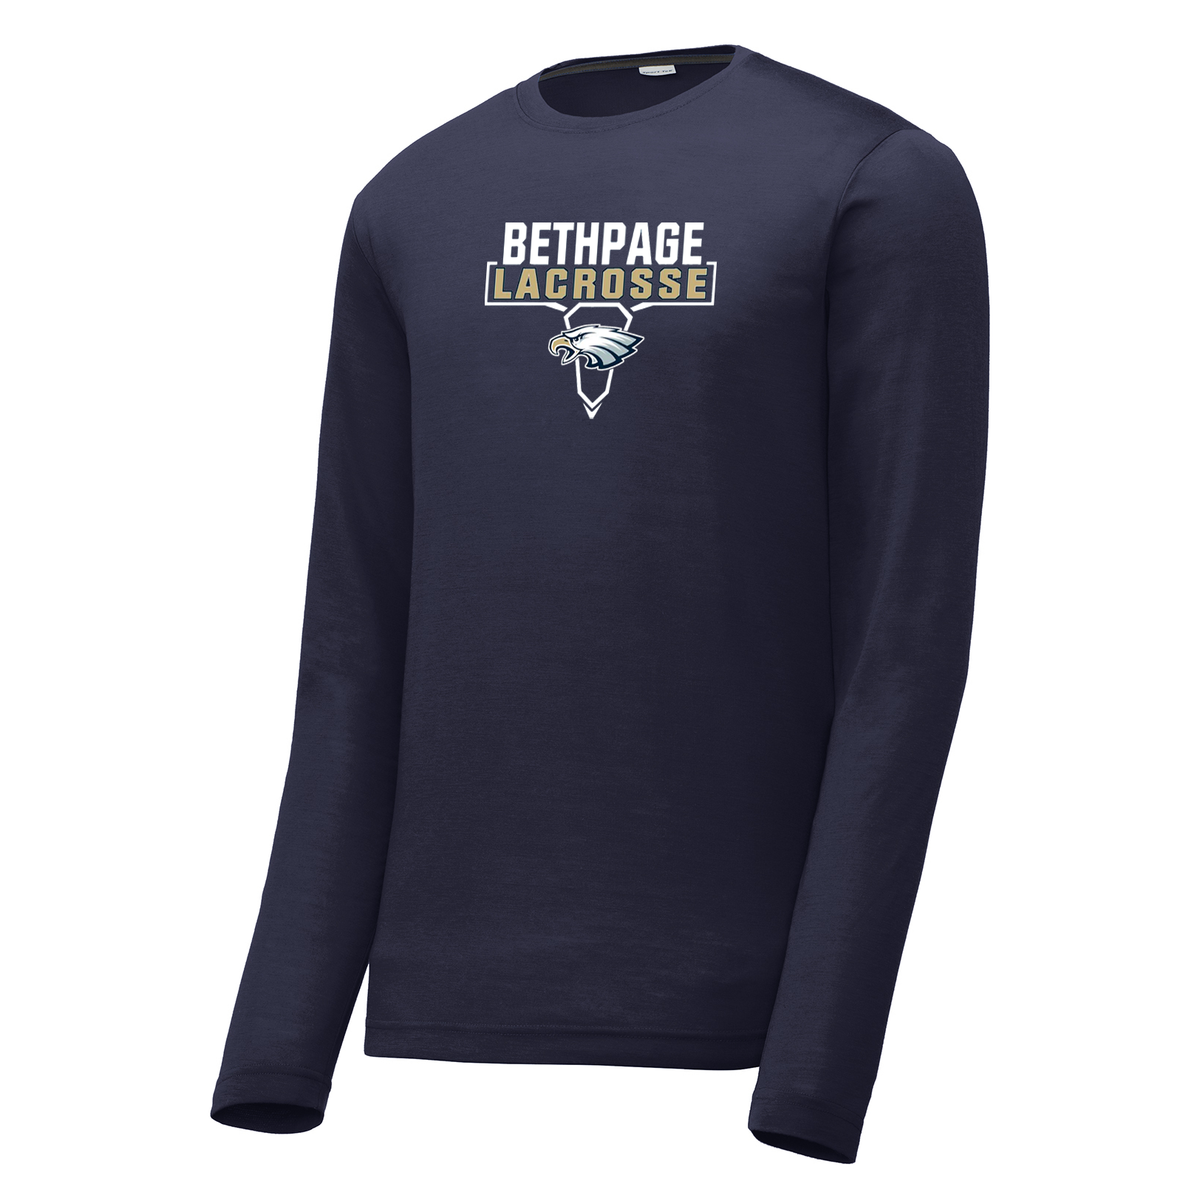 Bethpage Lacrosse Long Sleeve CottonTouch Performance Shirt